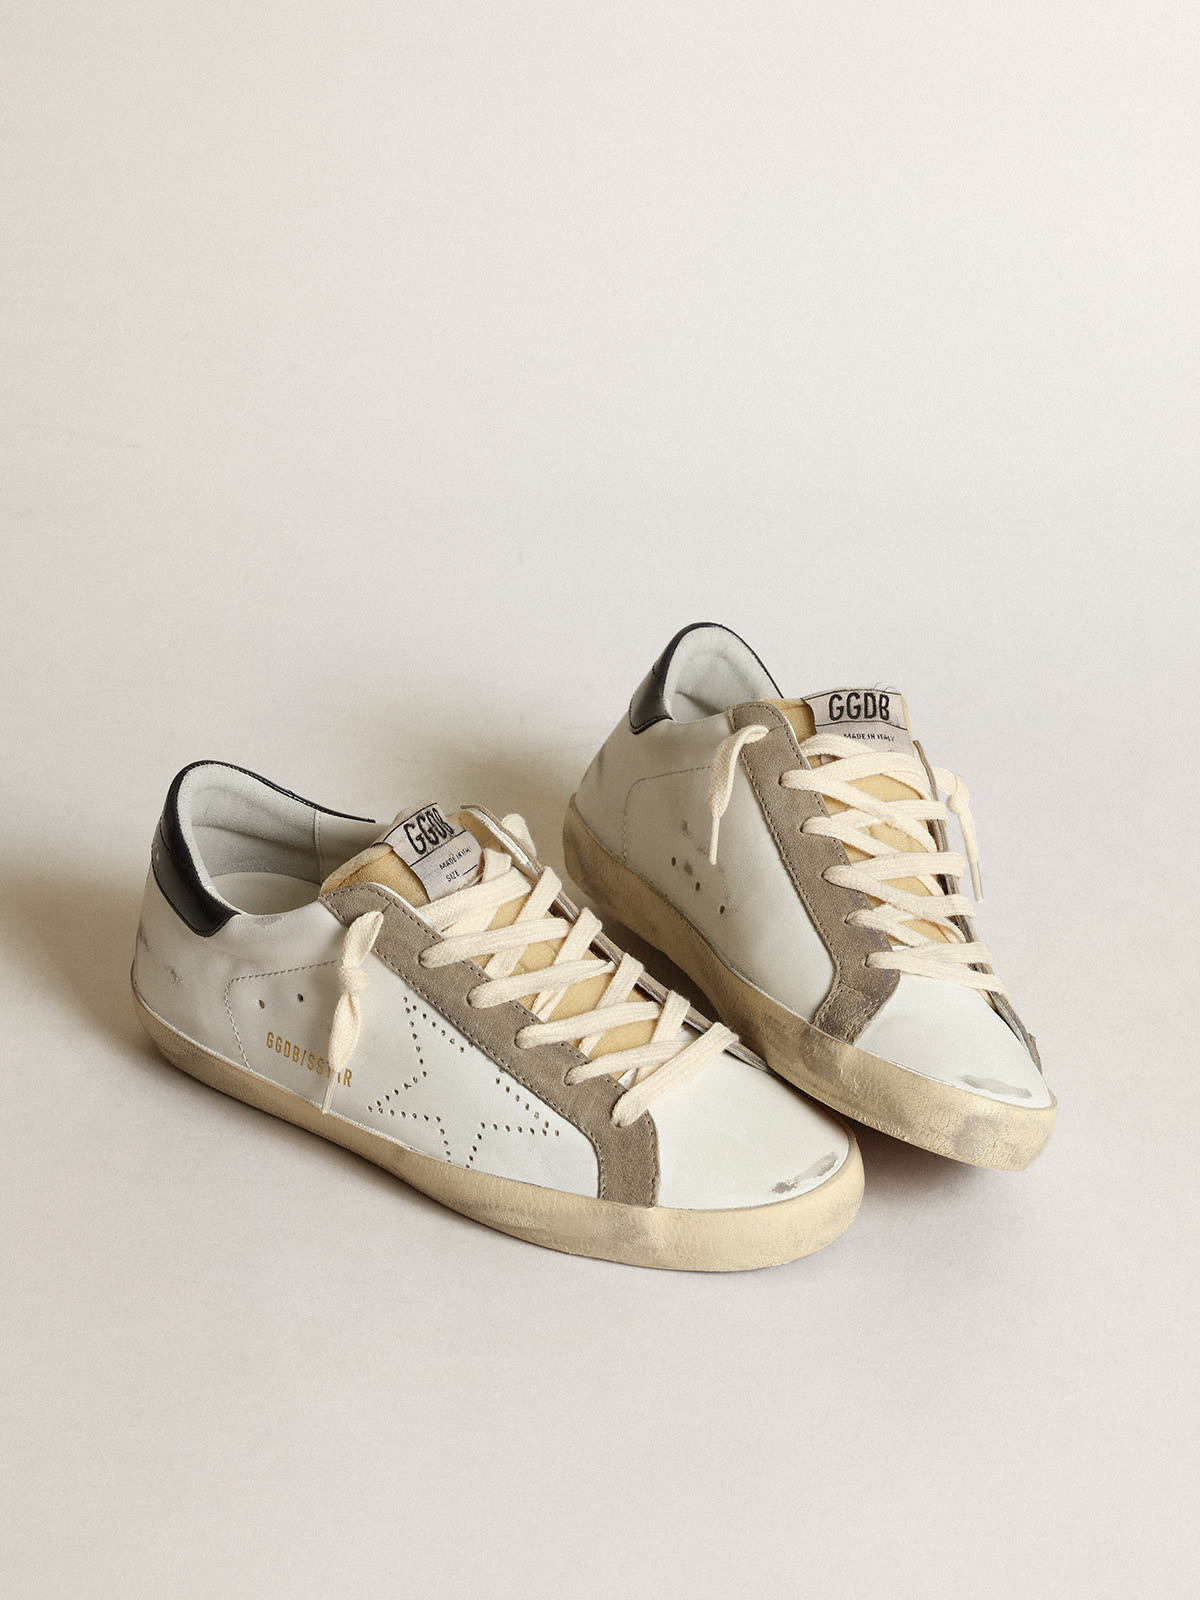 Golden Goose - Women's Super-Star with perforated star and midnight blue heel tab in 